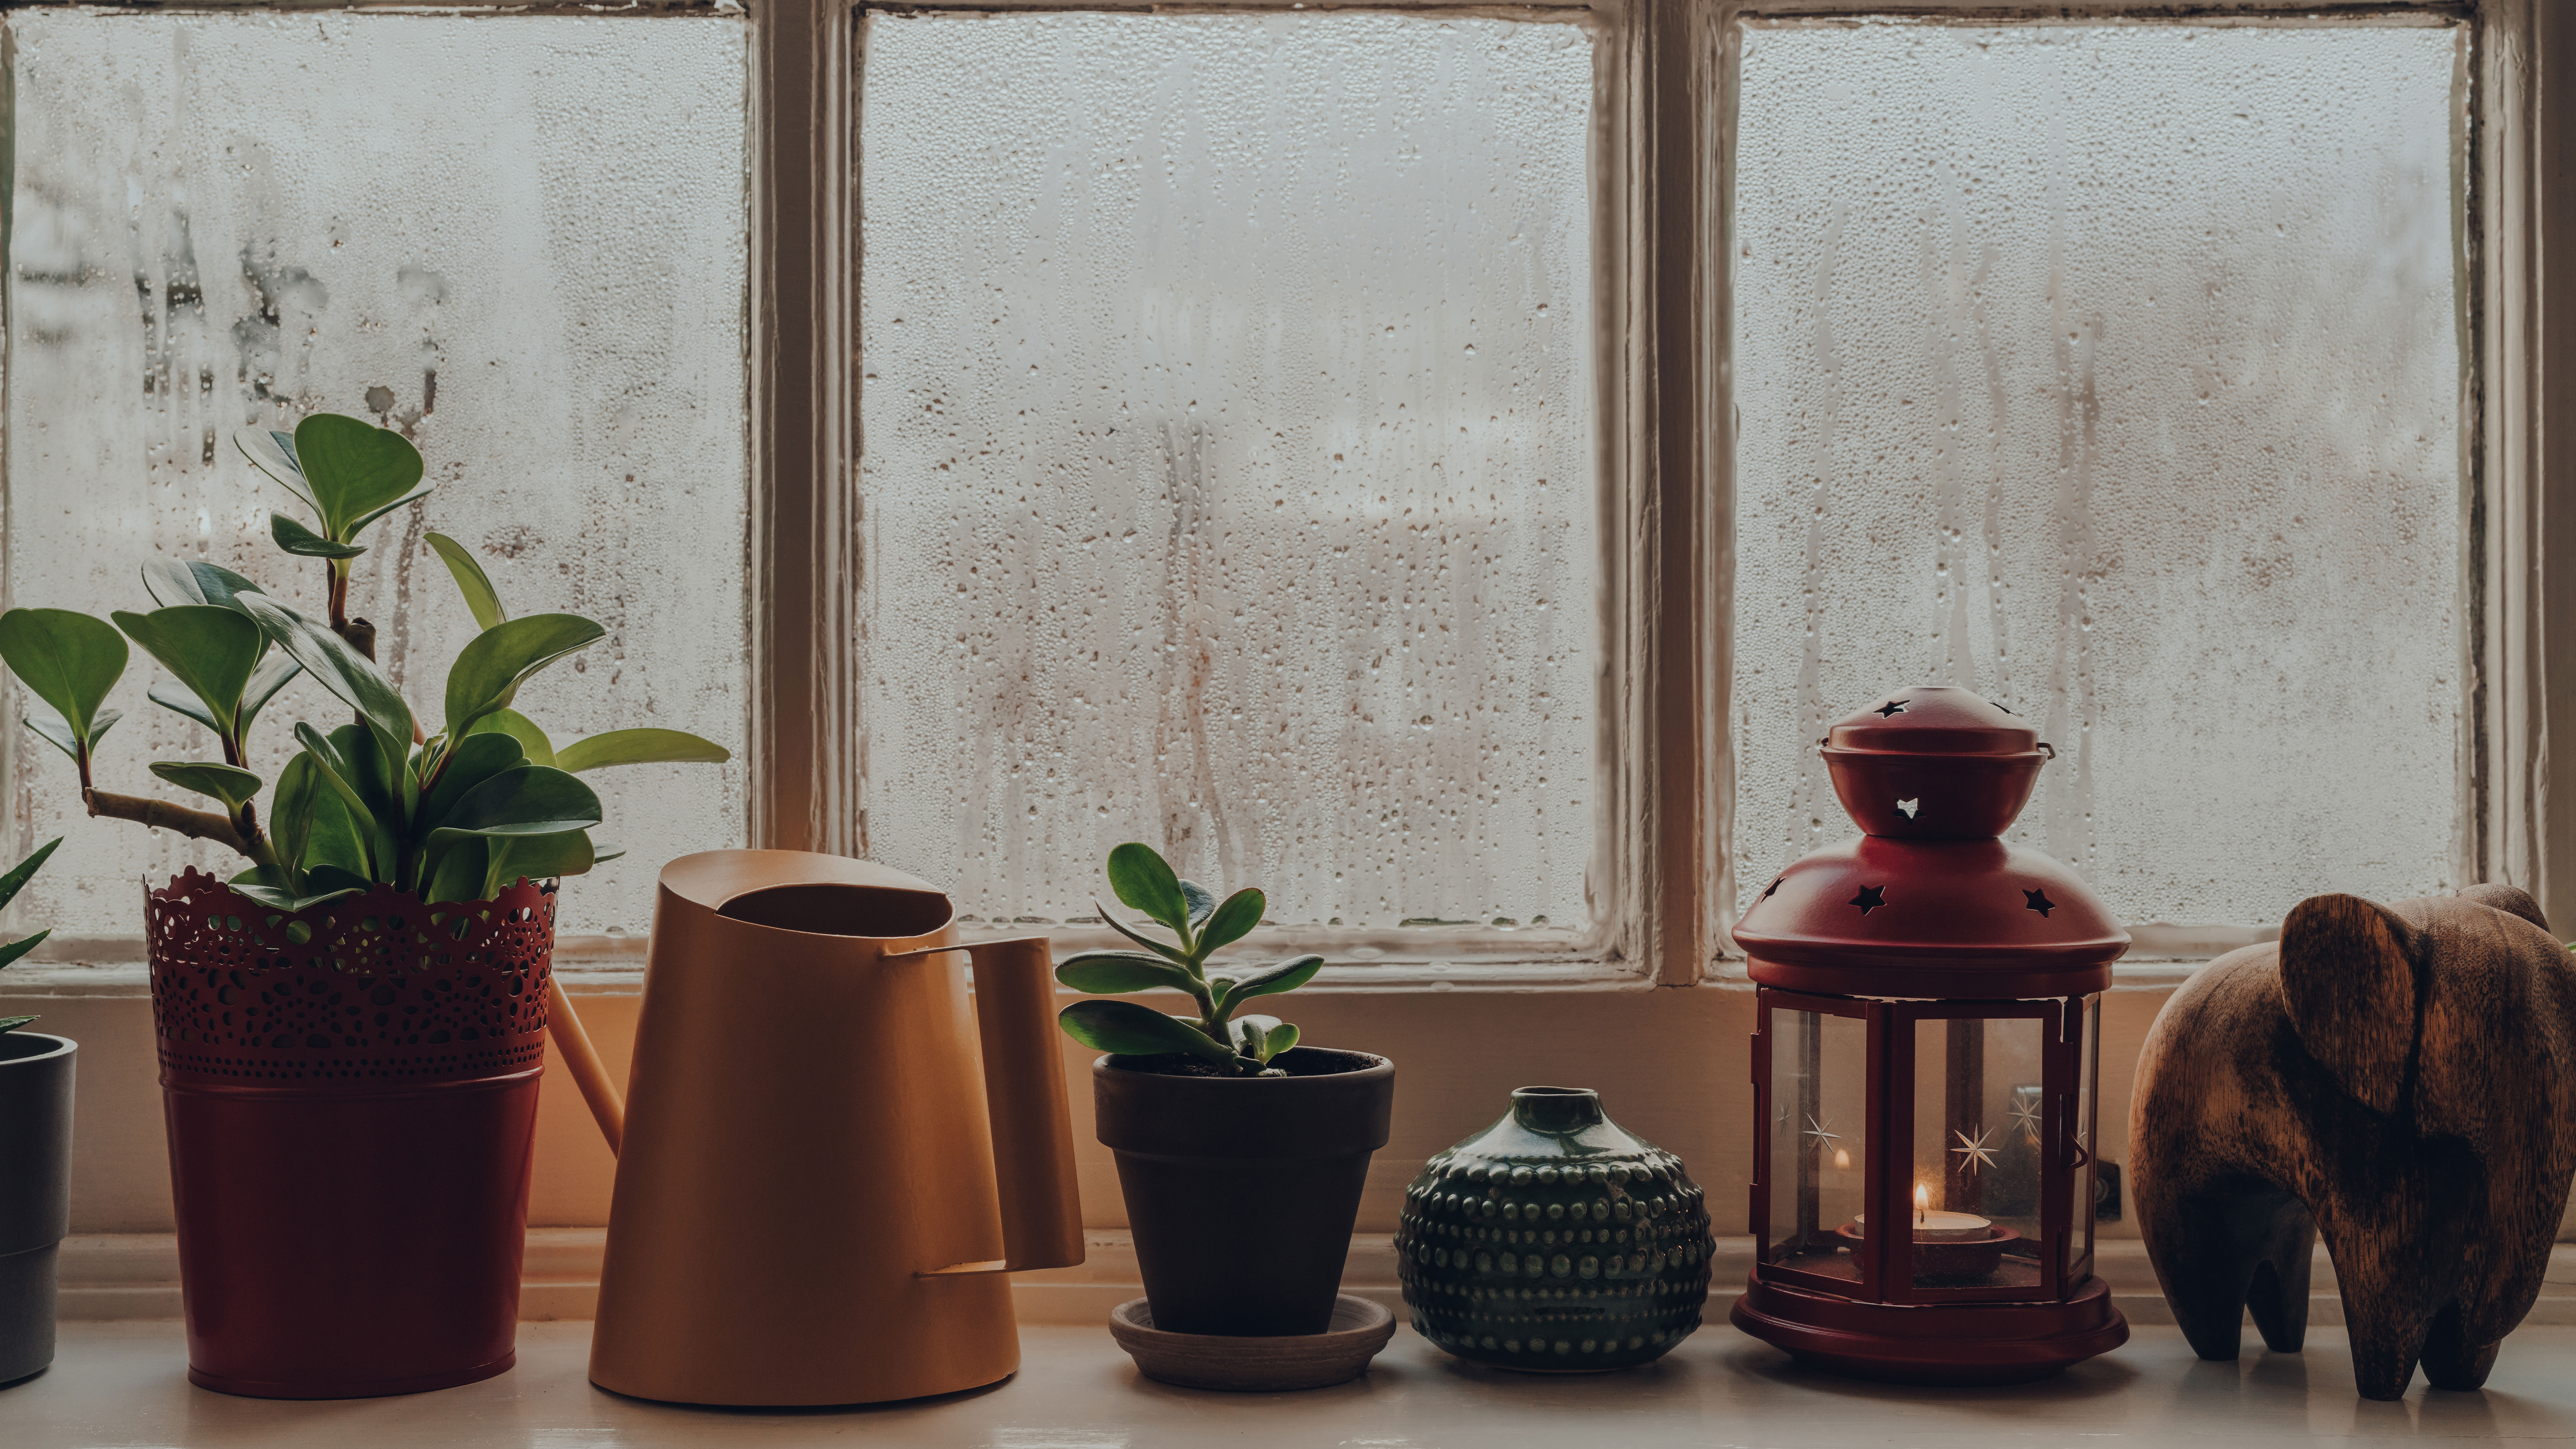 How to stop condensation on windows